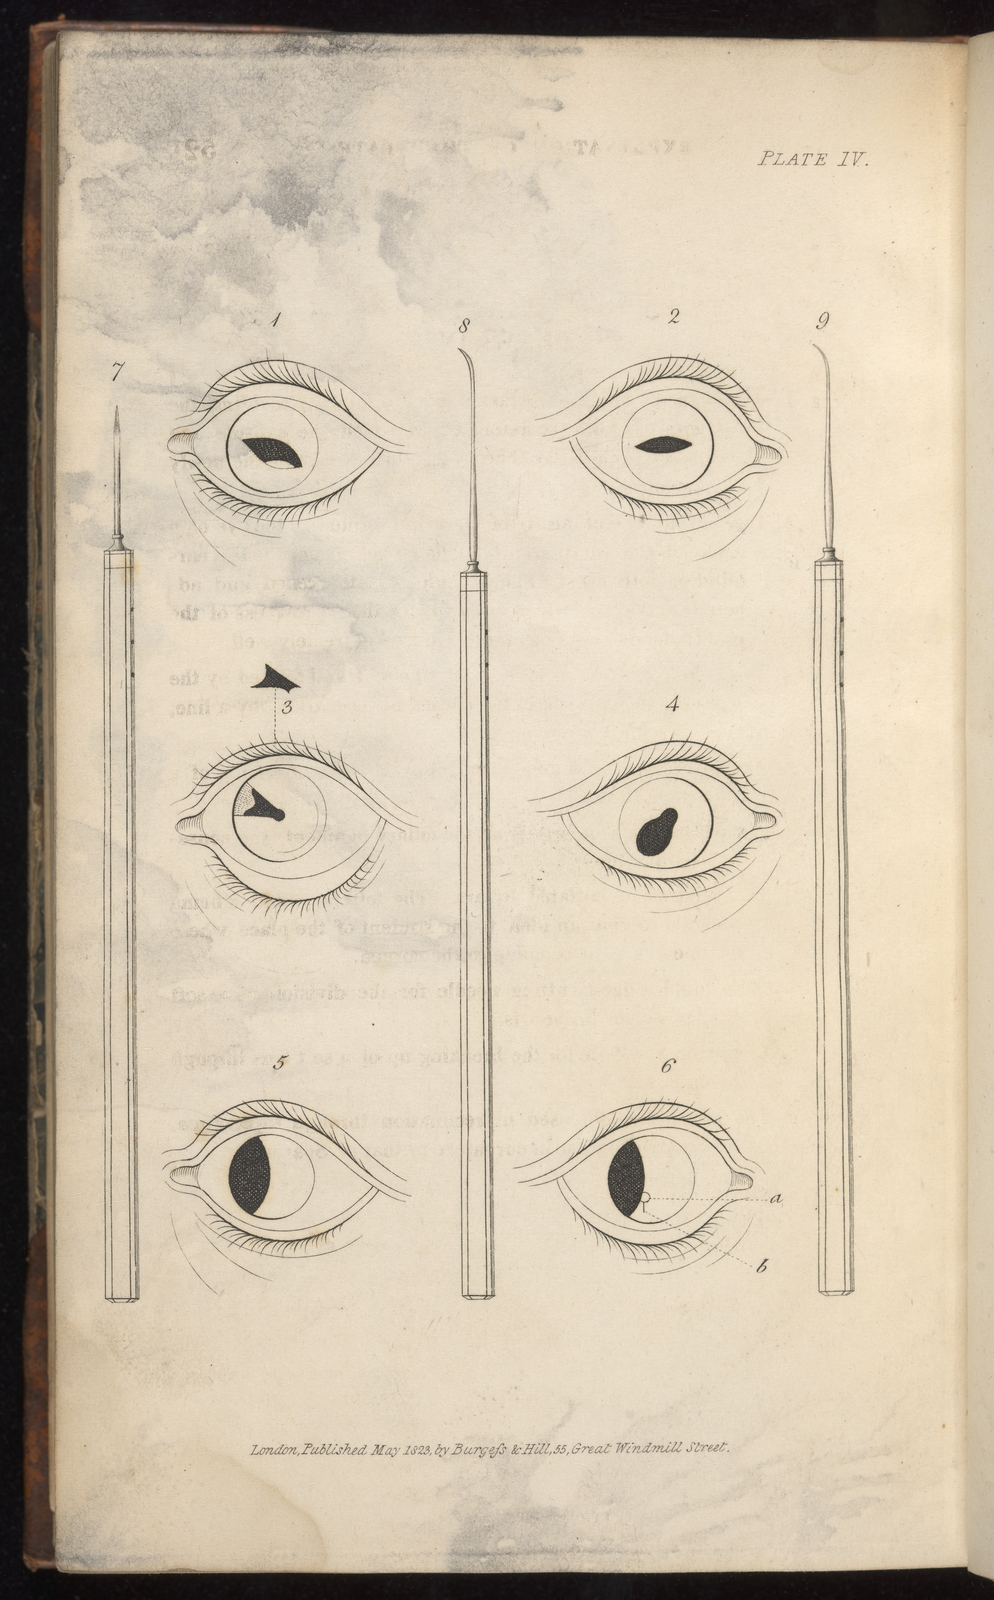 Black and white engraving of eyes illustrating how to make incisions of different types.